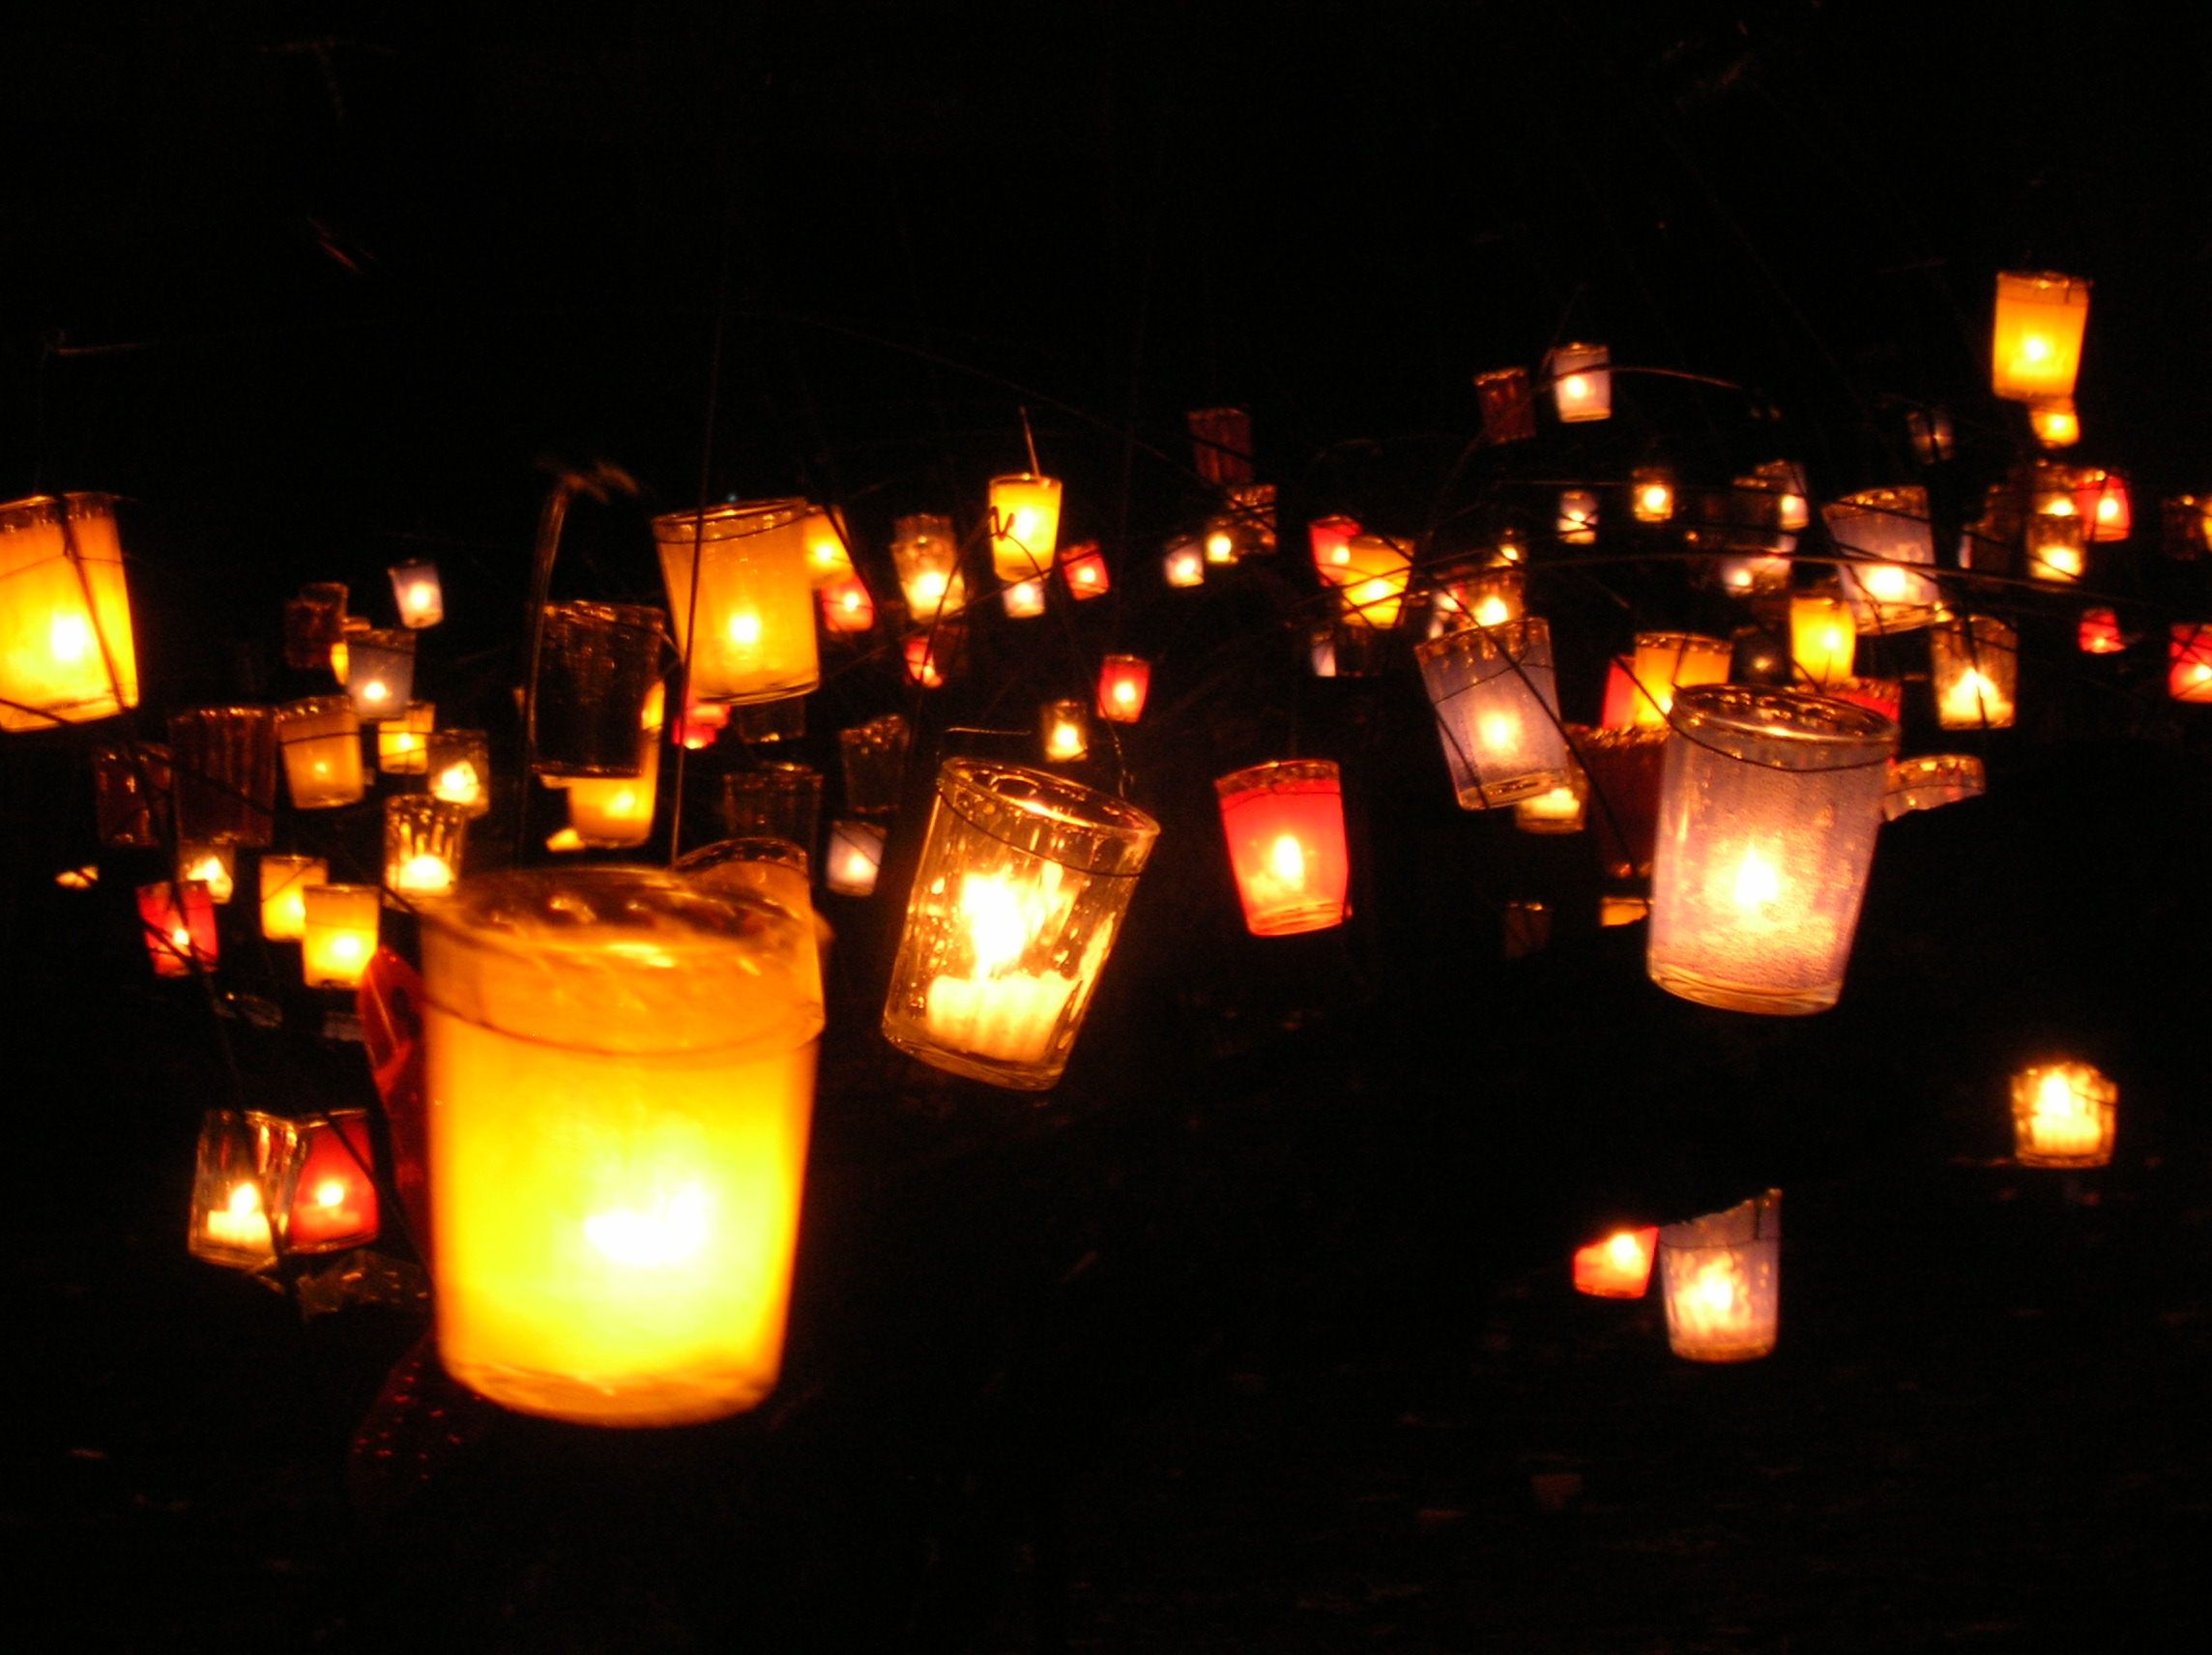 Candles - Candles Photo (35108440) - Fanpop